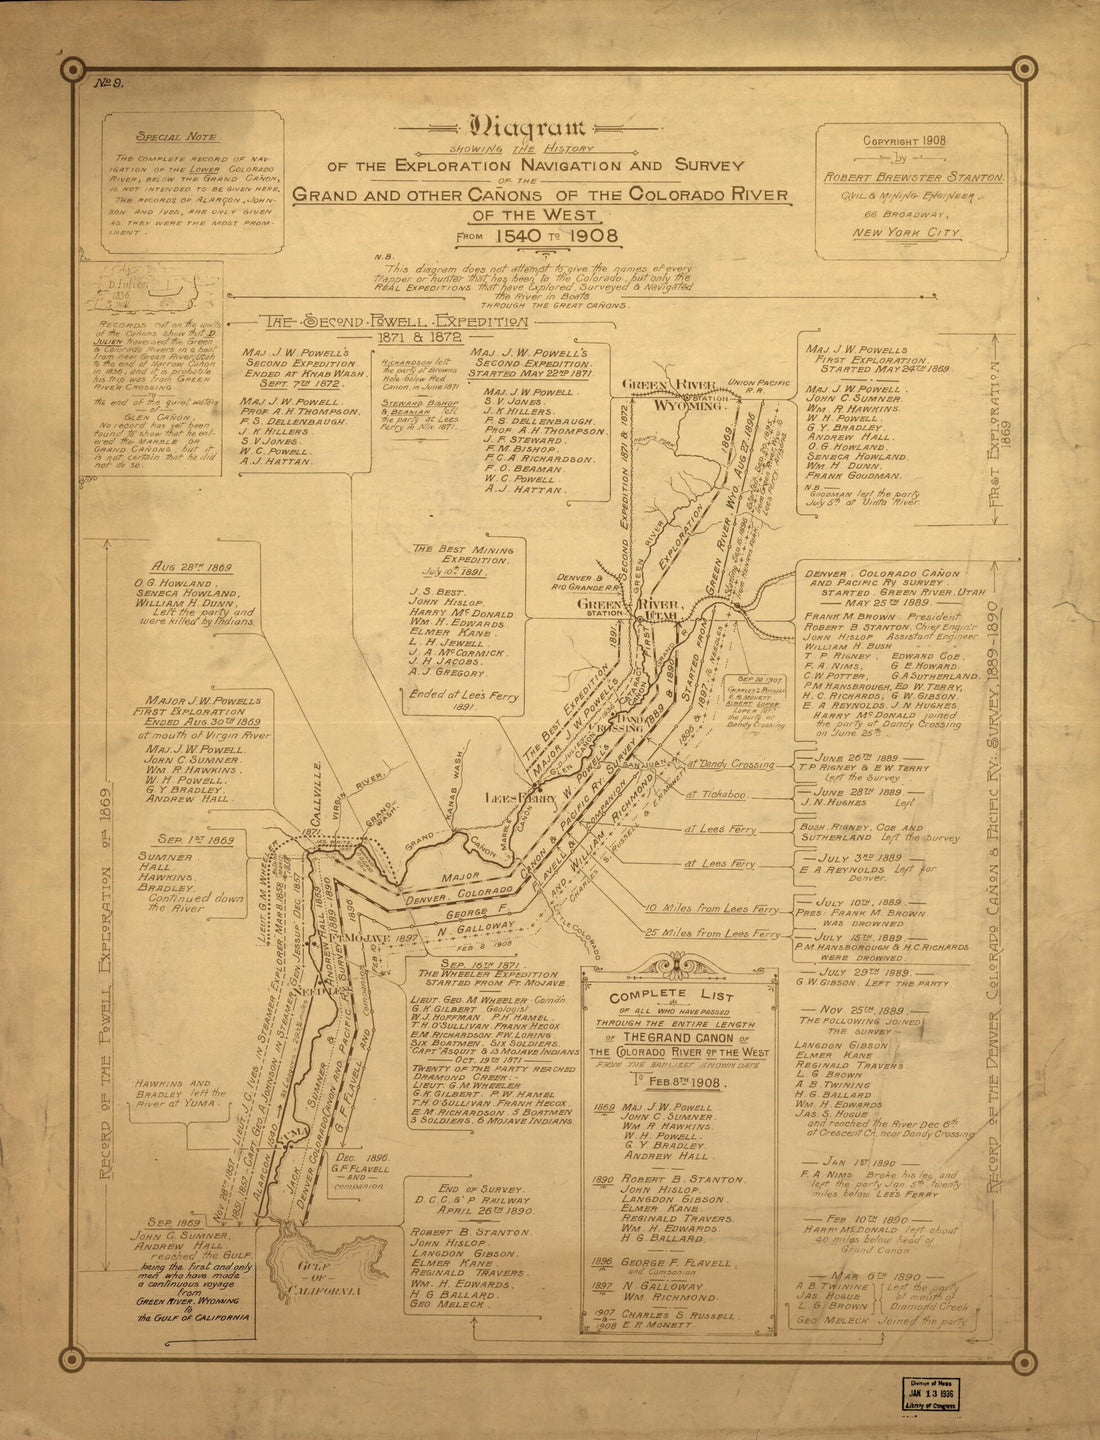 This old map of Diagram Showing the History of the Exploration and Navigation and Survey of the Grand and Other Canons of the Colorado River of the West from 1540 to from 1908 was created by Robert Brewster Stanton in 1908